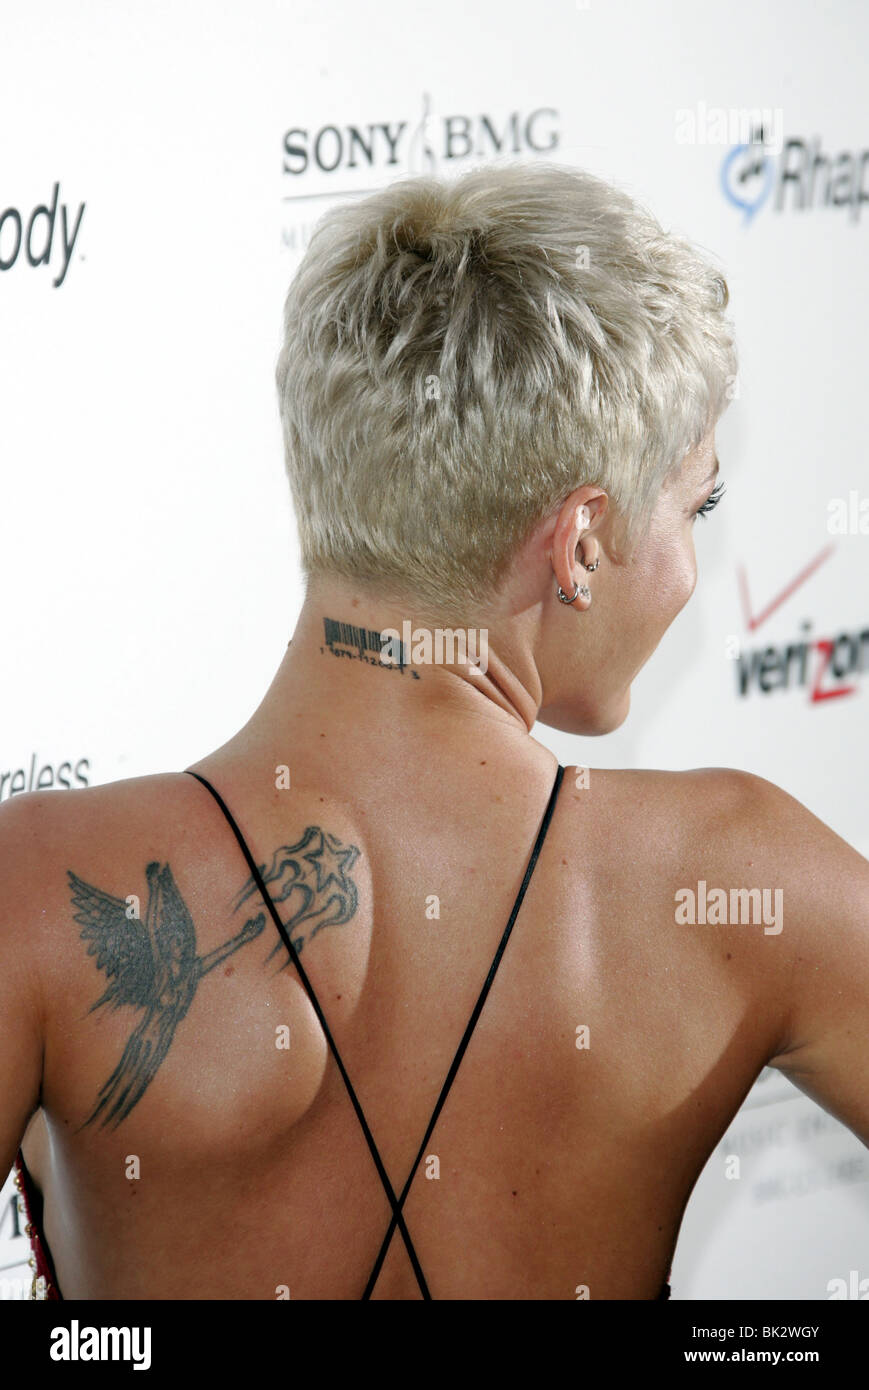 PINK 2007 CLIVE DAVIS PRE GRAMMY PARTY BEVERLY HILTON HOTEL BEVERLY HILLS LOS ANGELES USA 10 February 2007 Stock Photo